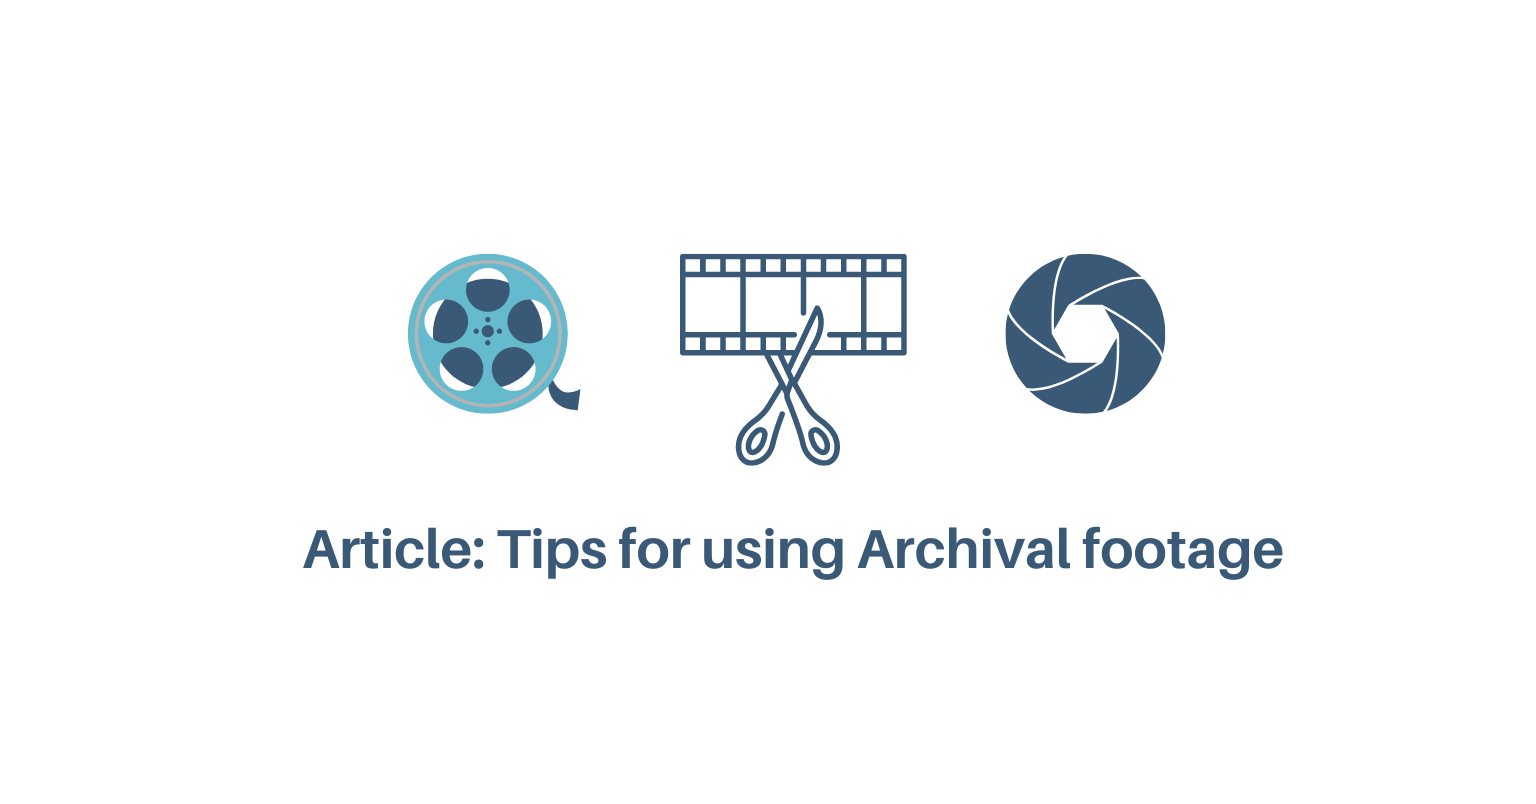 ARTICLE: TIPS FOR USING ARCHIVAL FOOTAGE